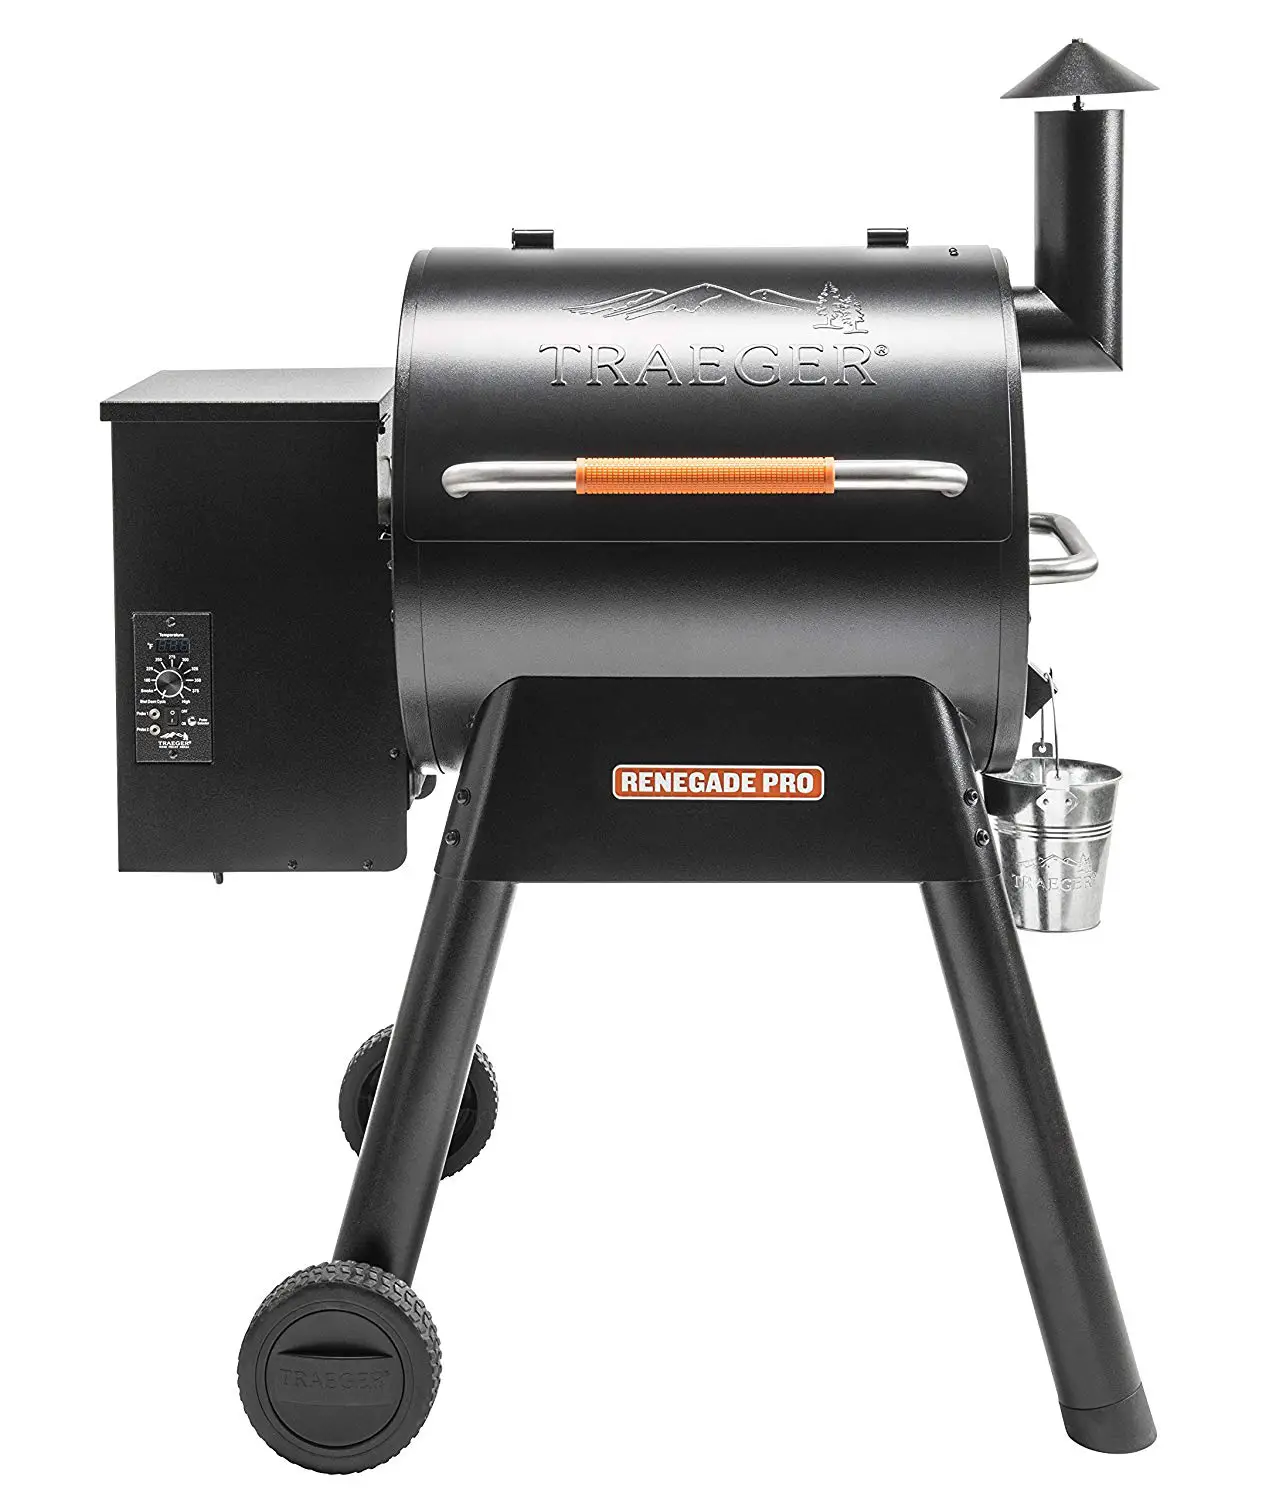 Amazon: Traeger Grills on Daily Deal + Free Shipping!  Wear It For Less